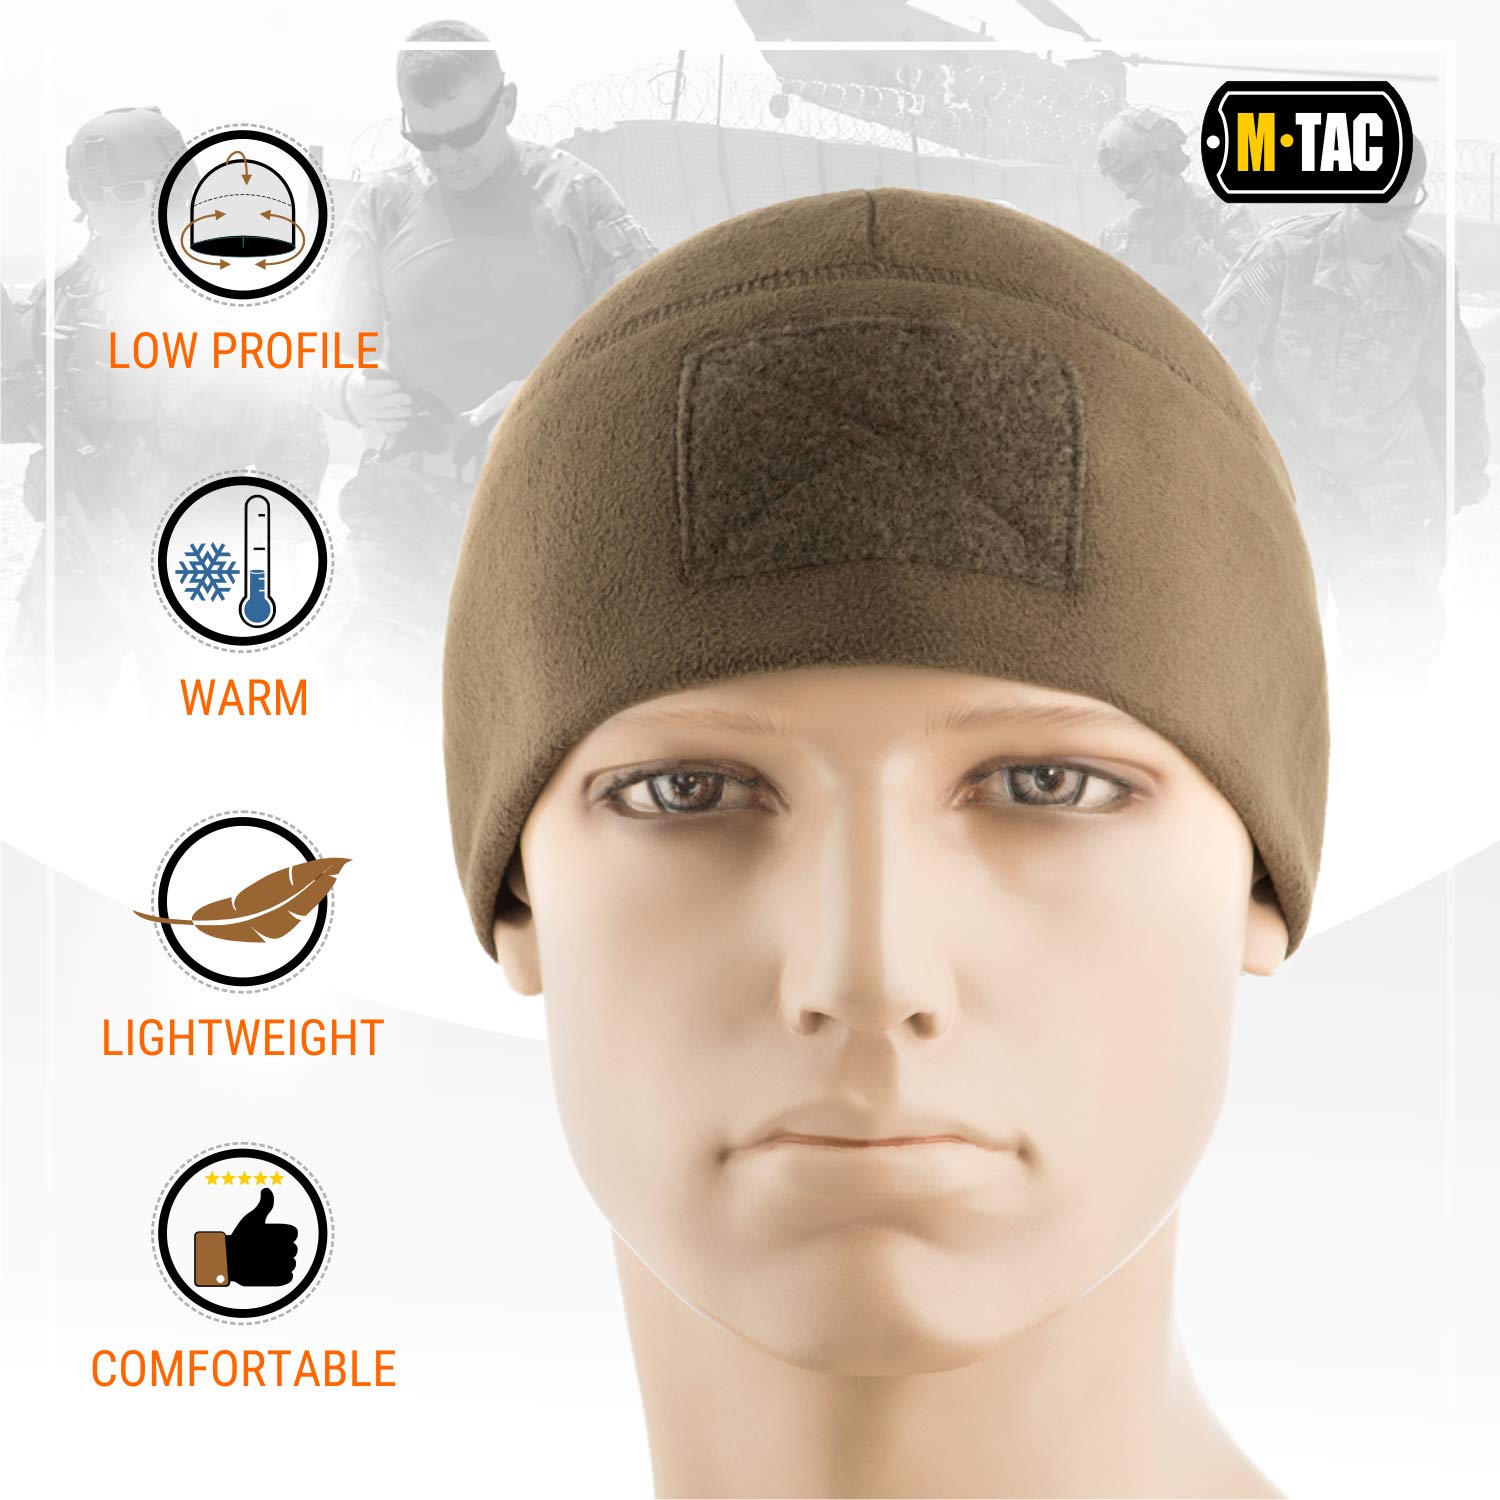 M-Tac Fleece Tactical Watch Cap Beanie With Patch Panel (270 g/m2)